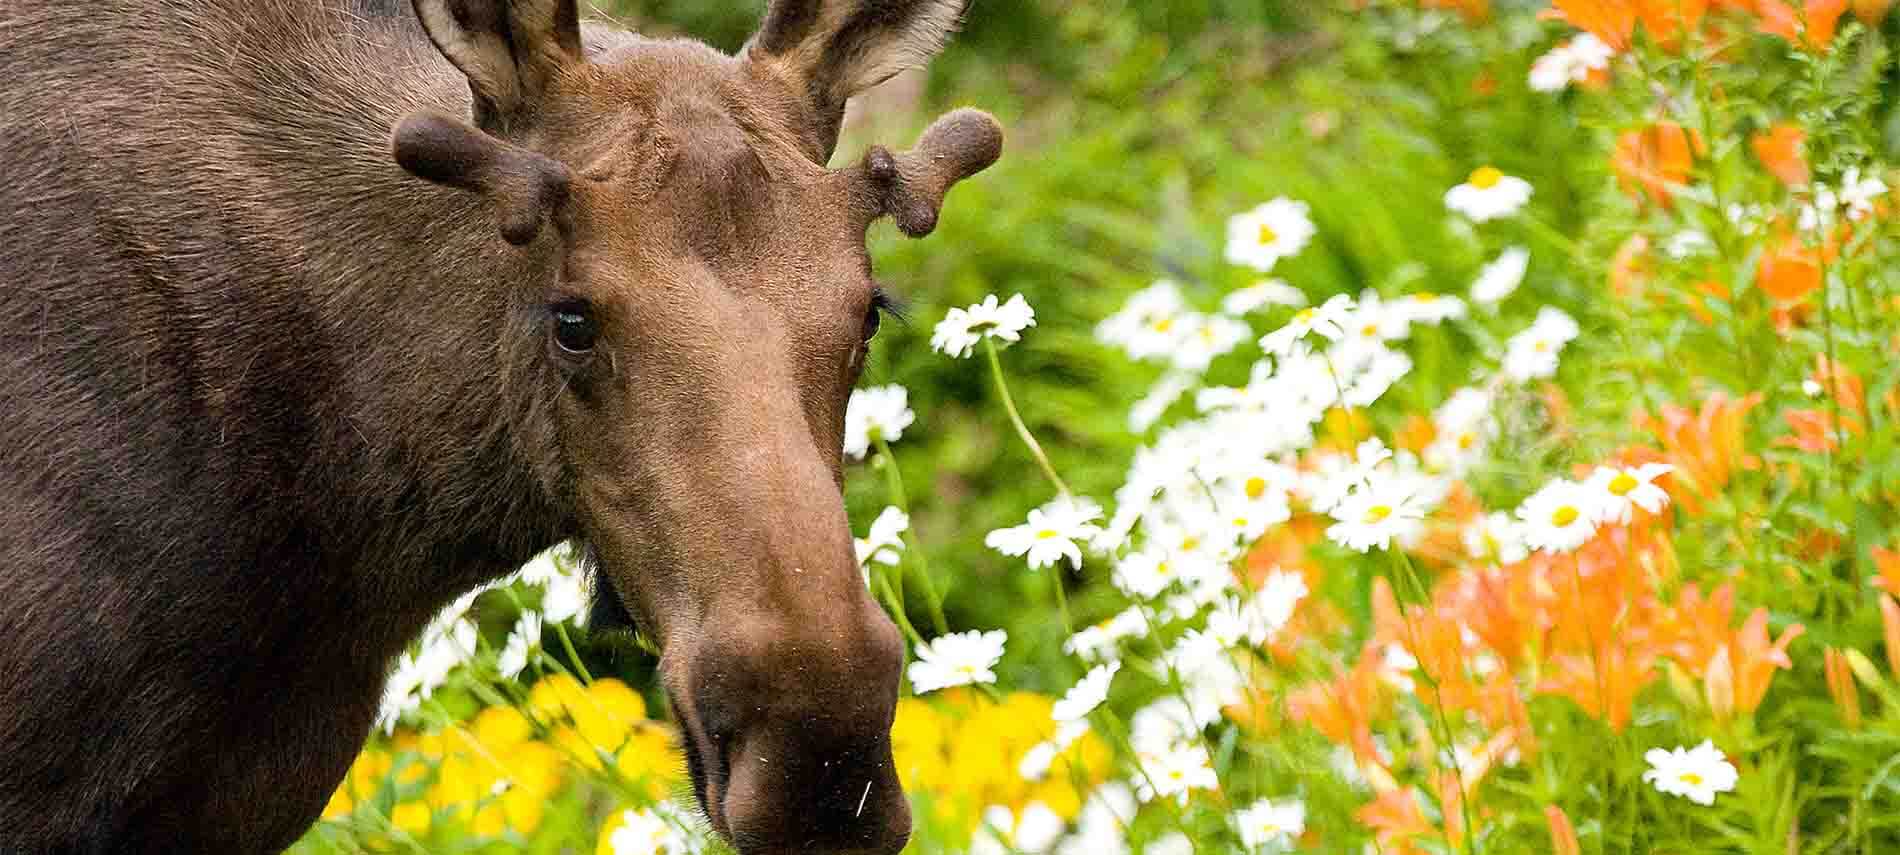 Moose eating daisies and other flowers  while being photographed.